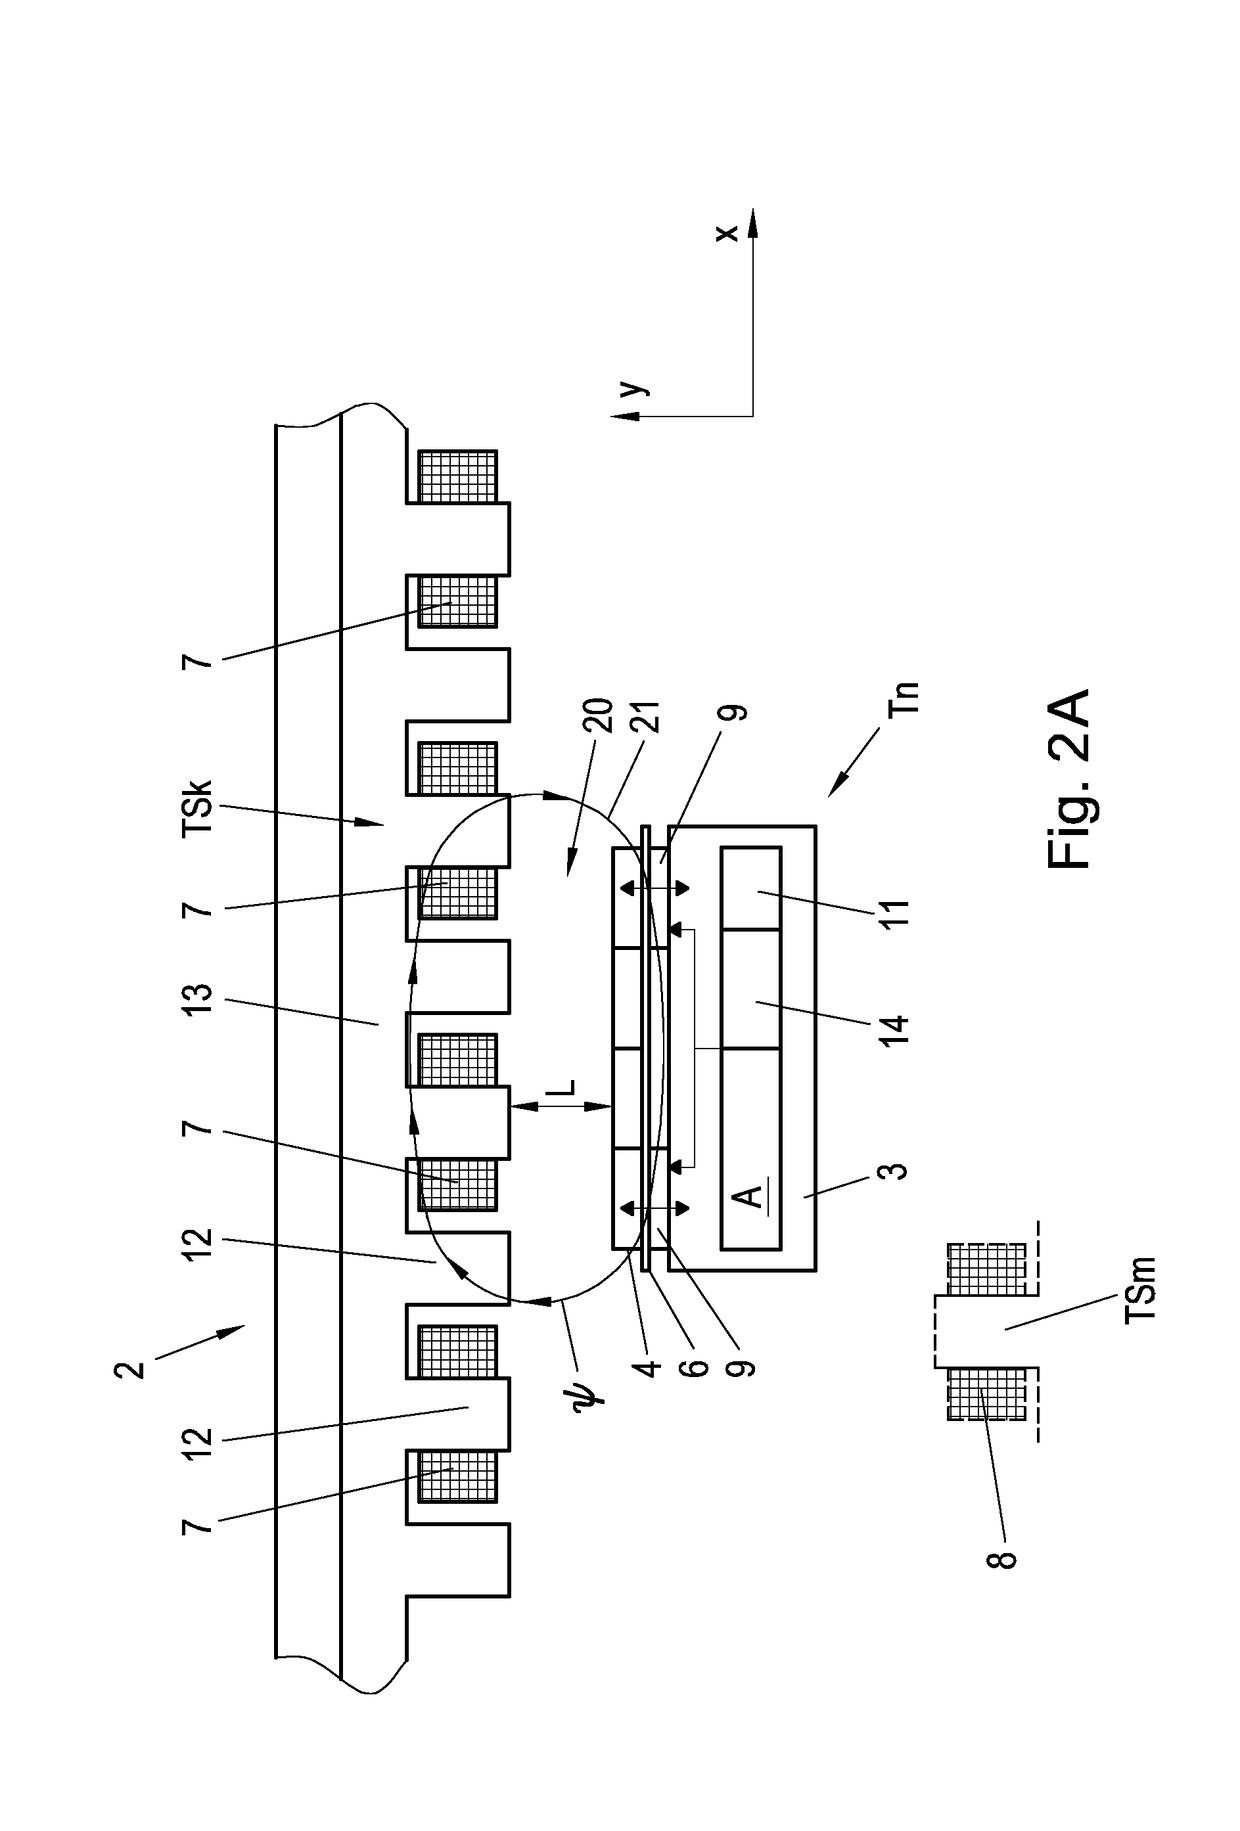 Method for operating a transport apparatus in the form of a long stator linear motor